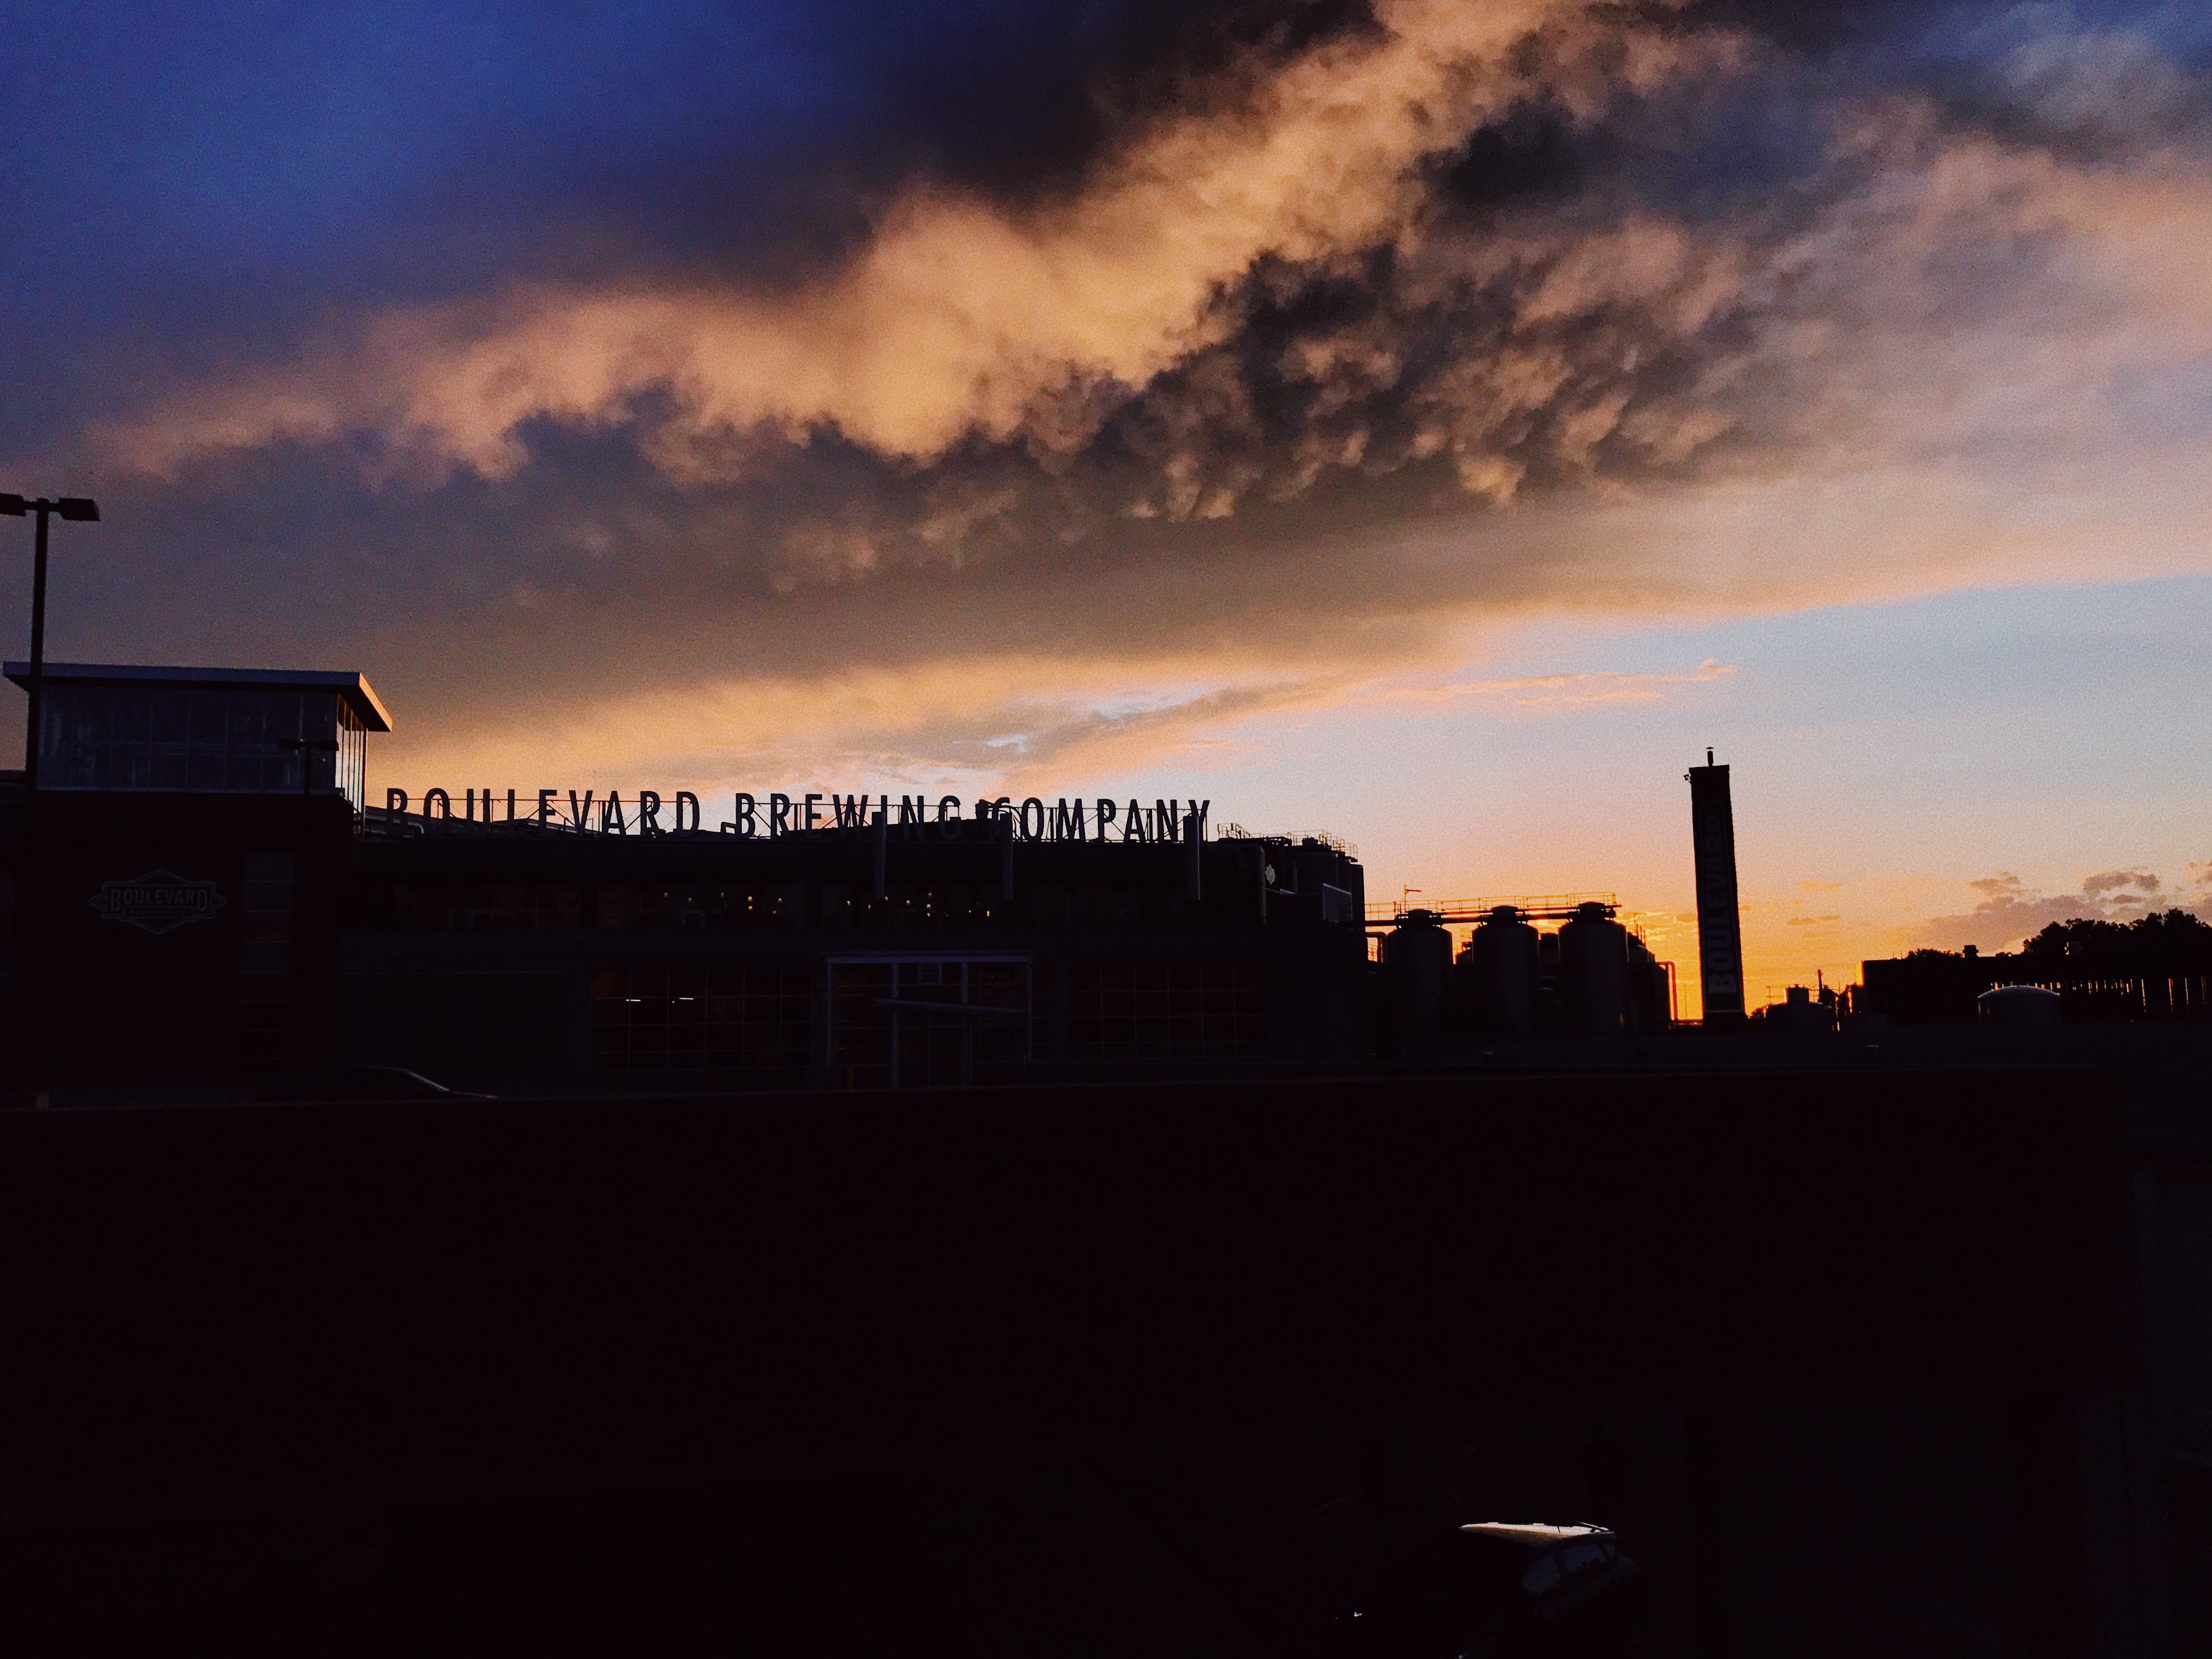 Sunset photo of Boulevard Brewing Co.